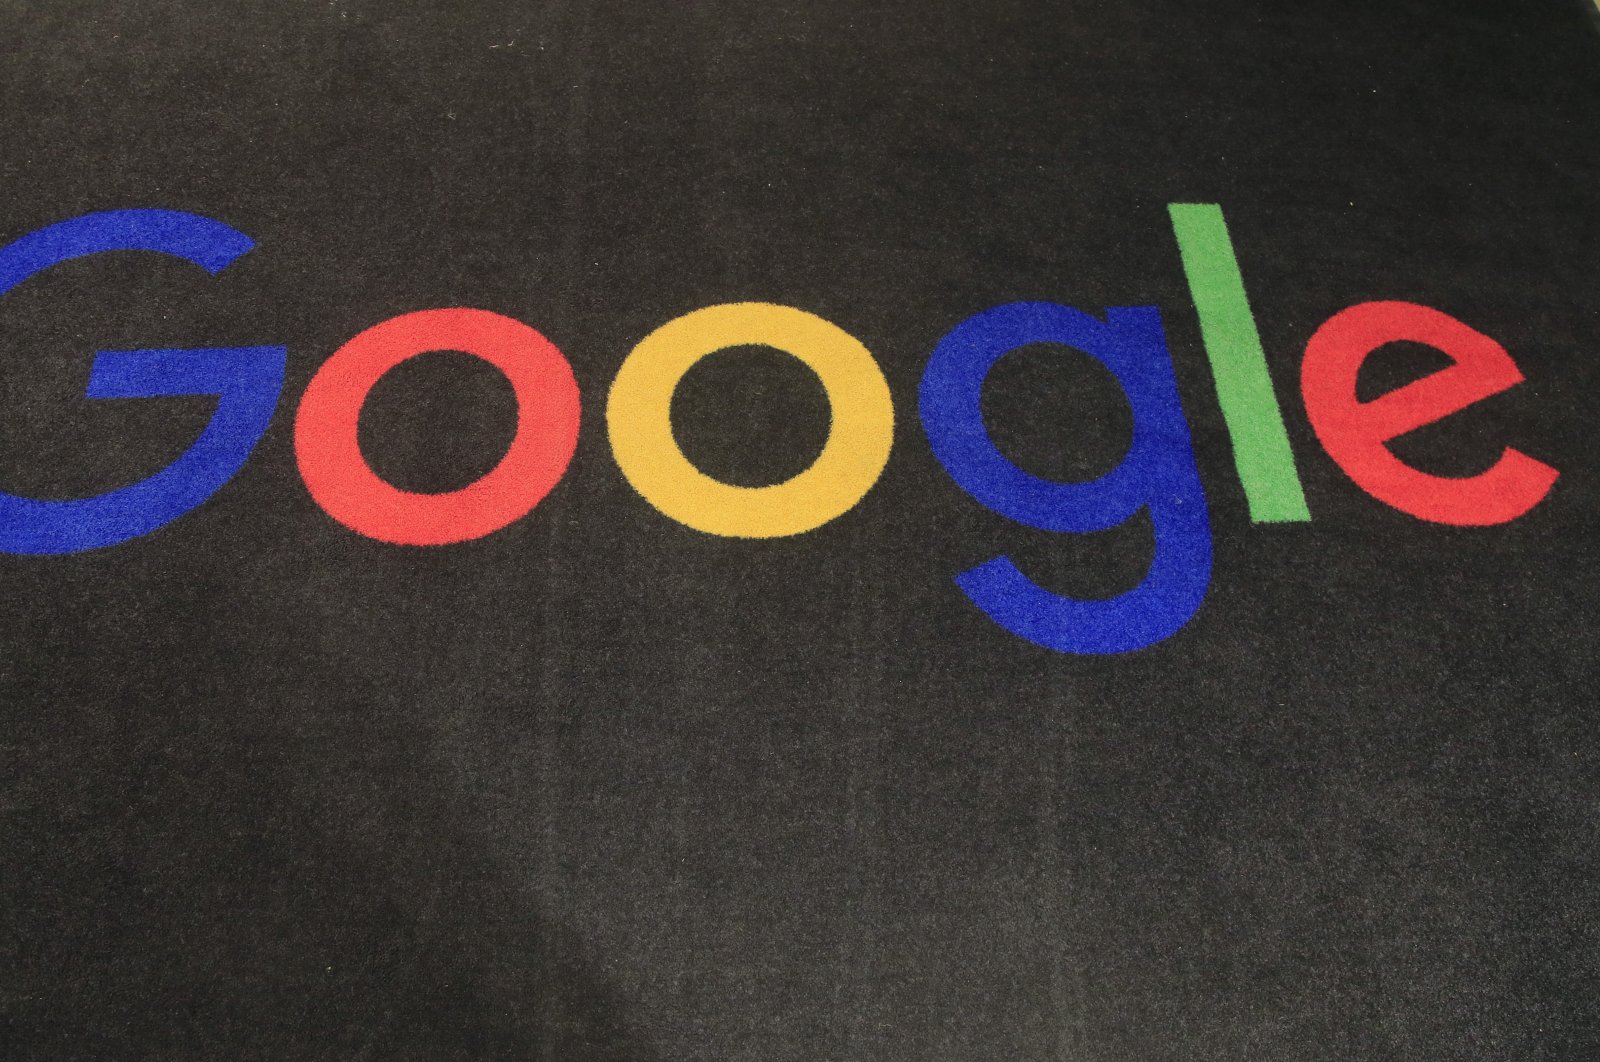 The logo of Google is displayed on a carpet at the entrance hall of Google France in Paris, Nov. 18, 2019. (AP Photo)